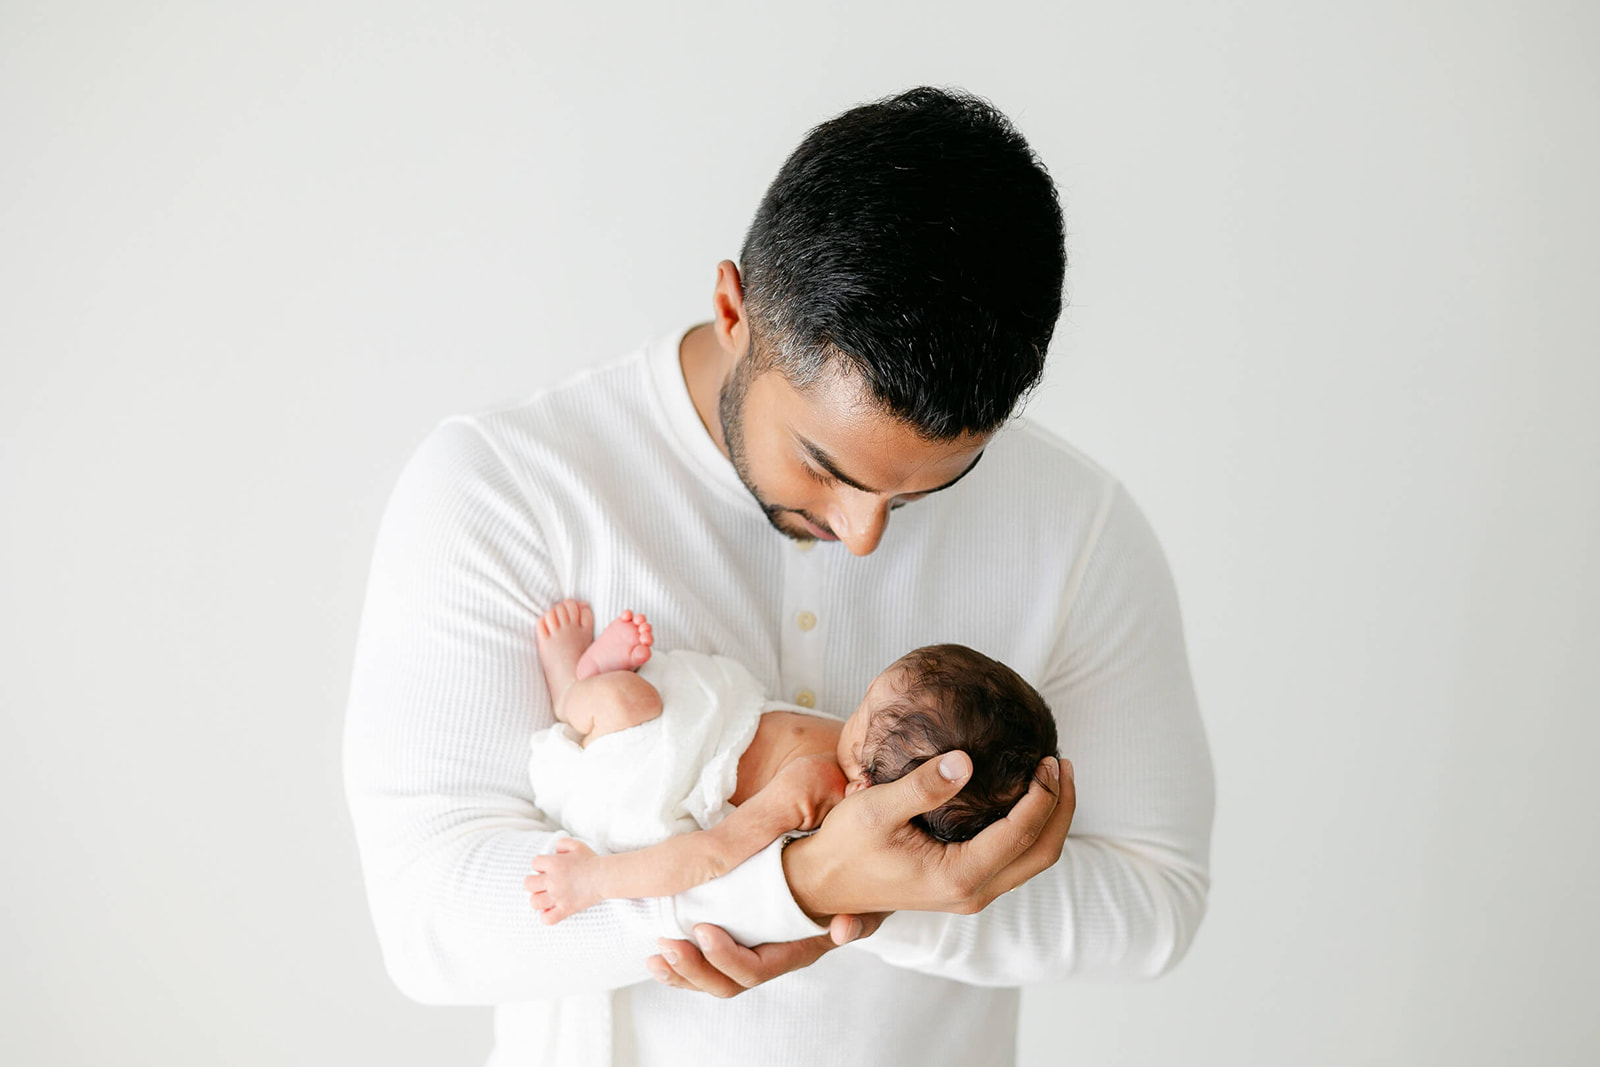 A new father in a white henley smiles down at his newborn baby in his hands before meeting a Houston Au Pair